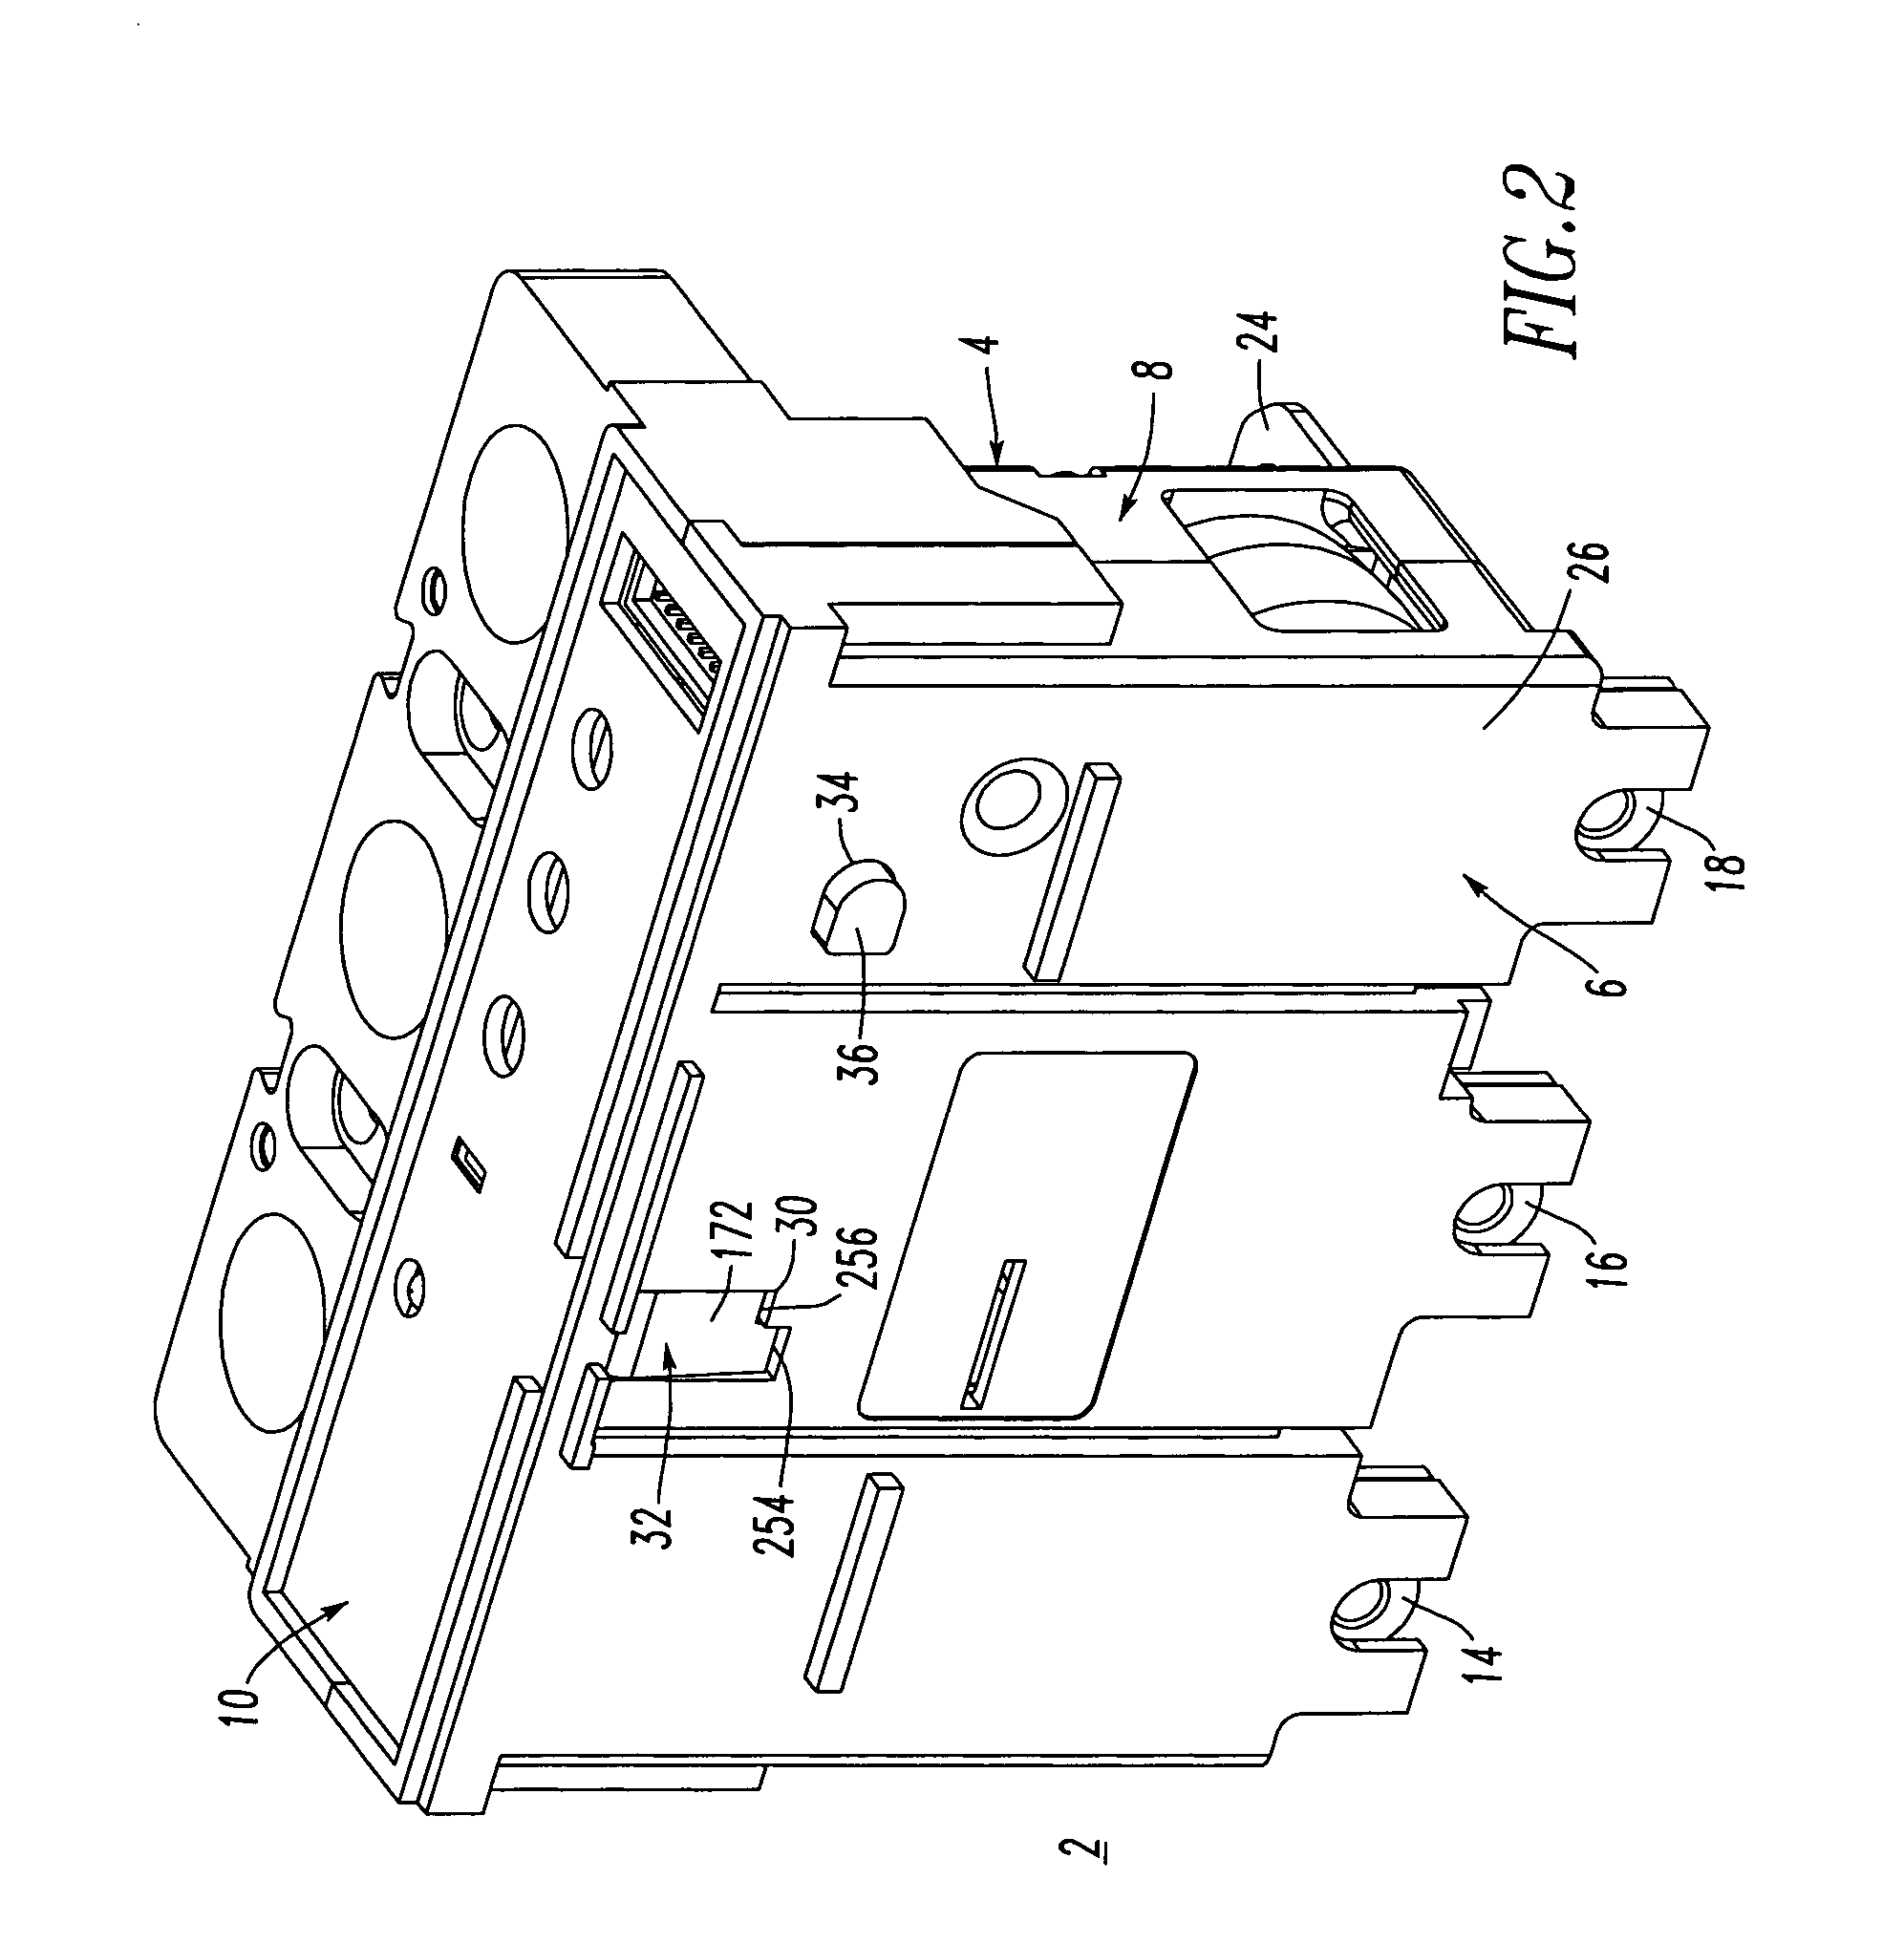 Circuit breaker trip unit including a plunger resetting a trip actuator mechanism and a trip bar